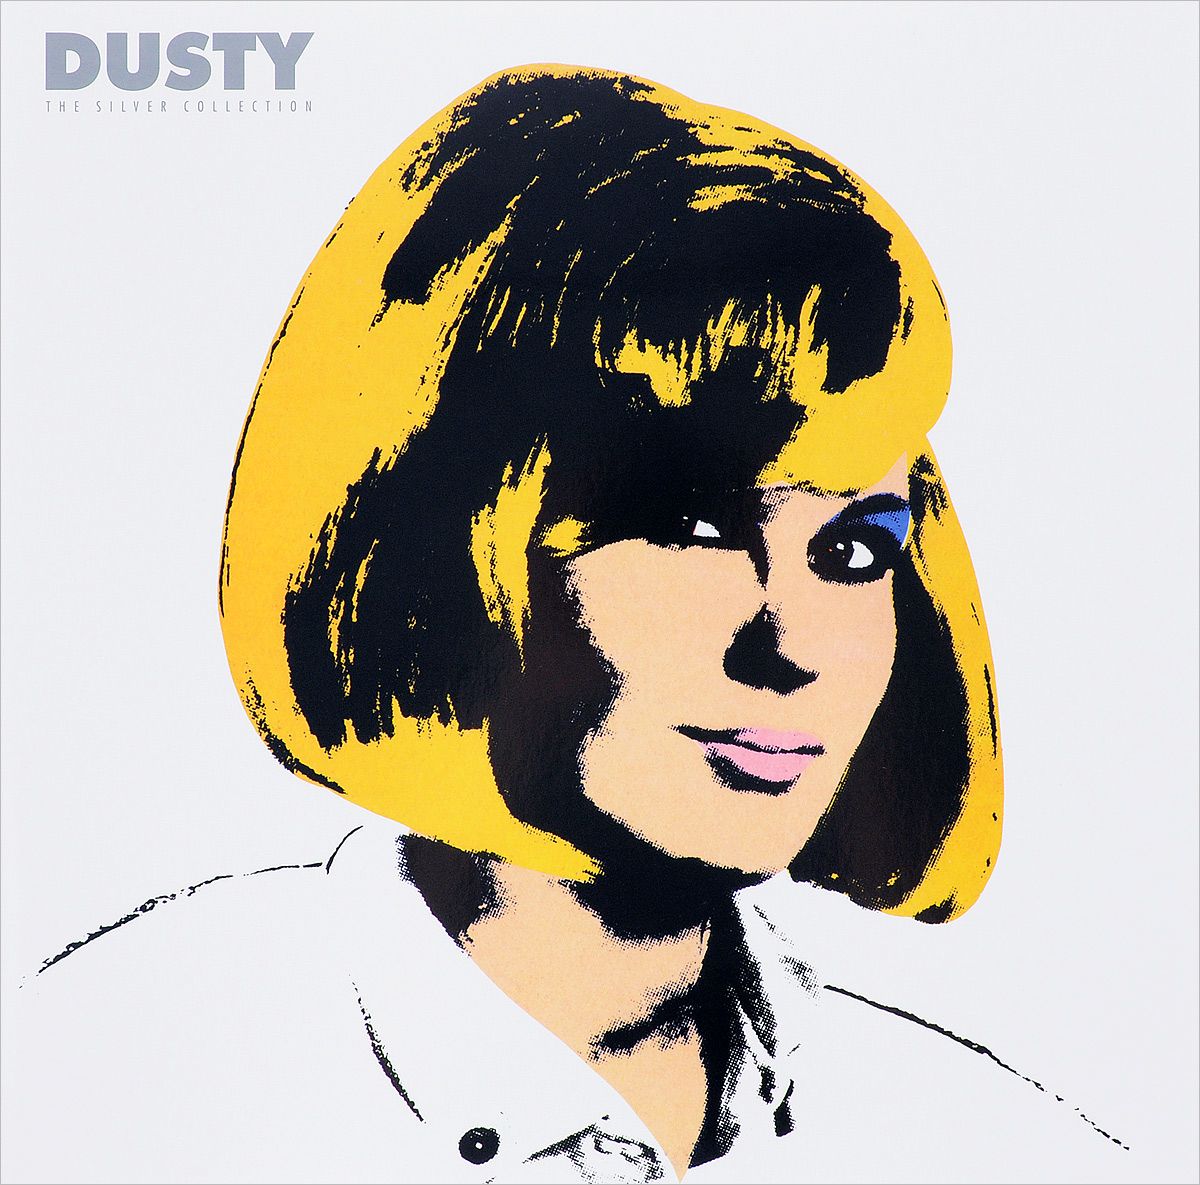 Виниловая пластинка Dusty Springfield, The Silver Collection (0602557071337) виниловая пластинка dusty springfield the silver collection 0602557071337